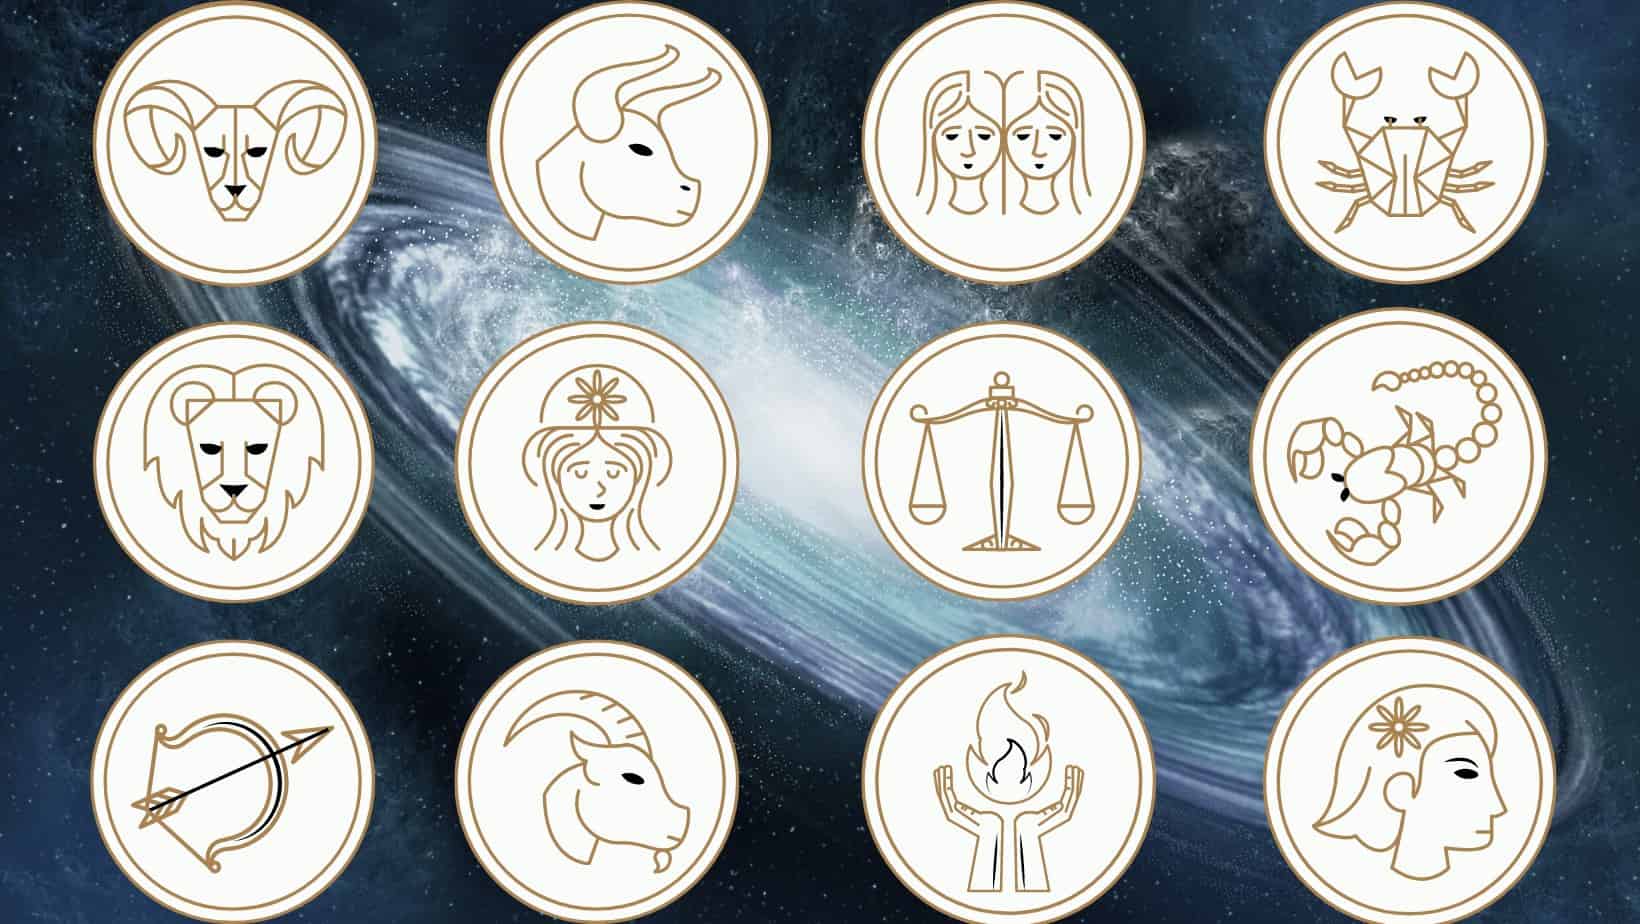 Astrologer Reveals Your Horoscope for July of 2021